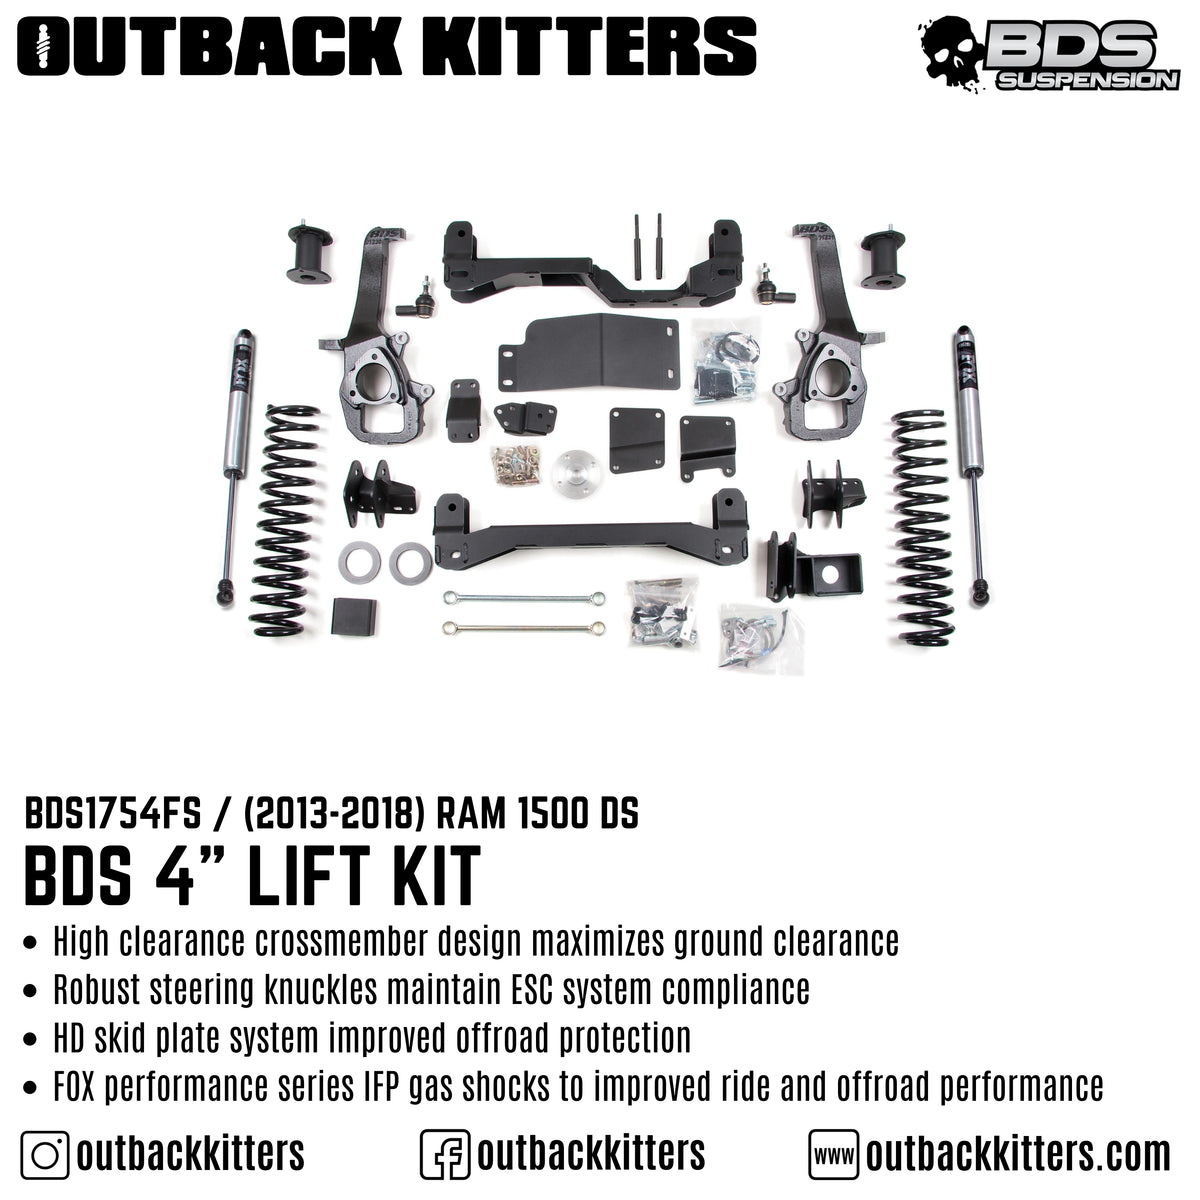 BDS 4" Lift Kit for Ram 1500 DS - Outback Kitters